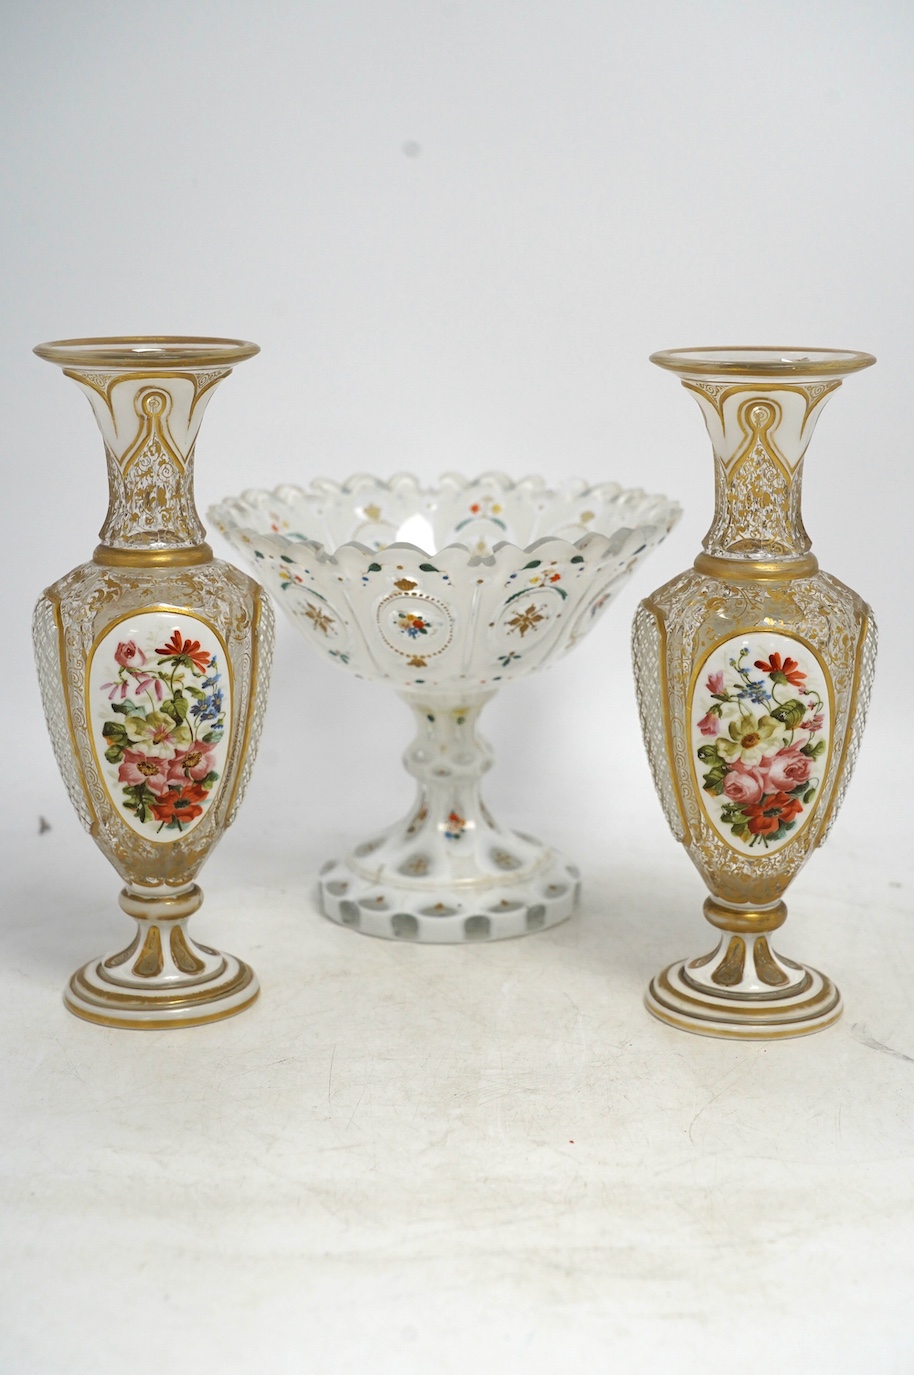 A pair of late 19th century Bohemian enamelled overlaid glass vases, and a similar overlaid glass comport. Condition - vases fair; comport poor